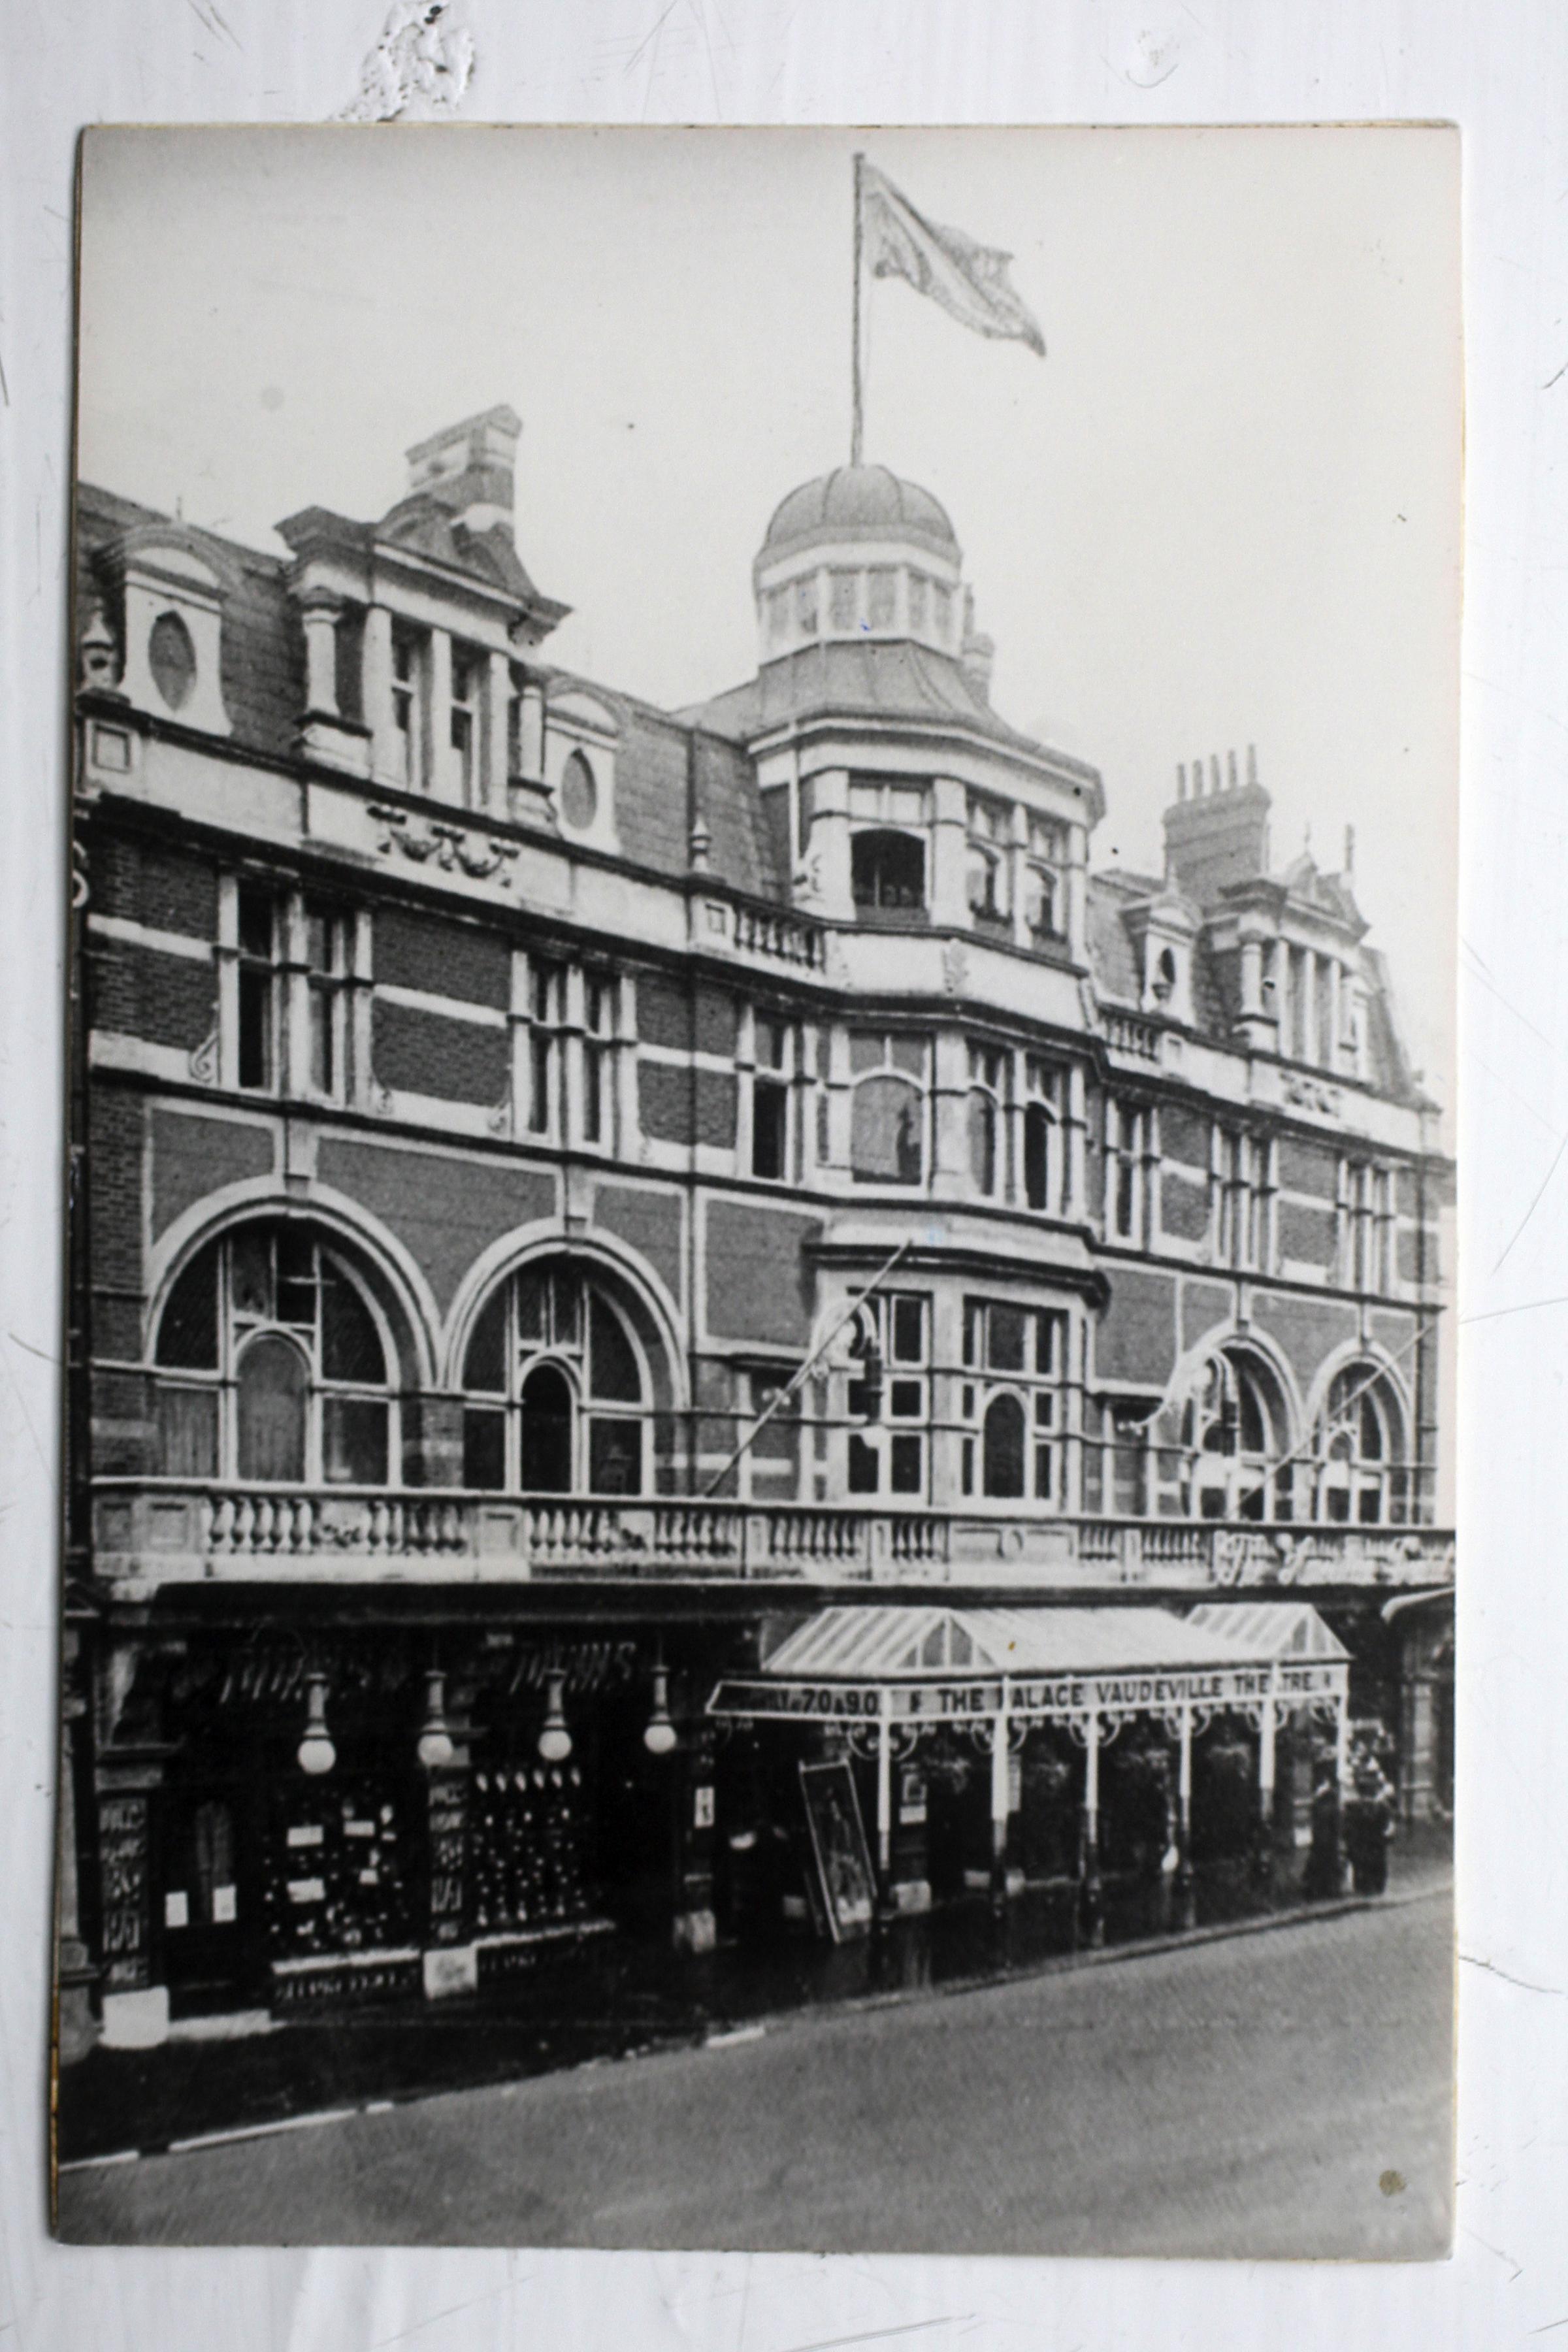 1888 supplement Daily Echo 120th anniversary: 7. The Palace of Varieties Theatre on the west side of Above Bar.